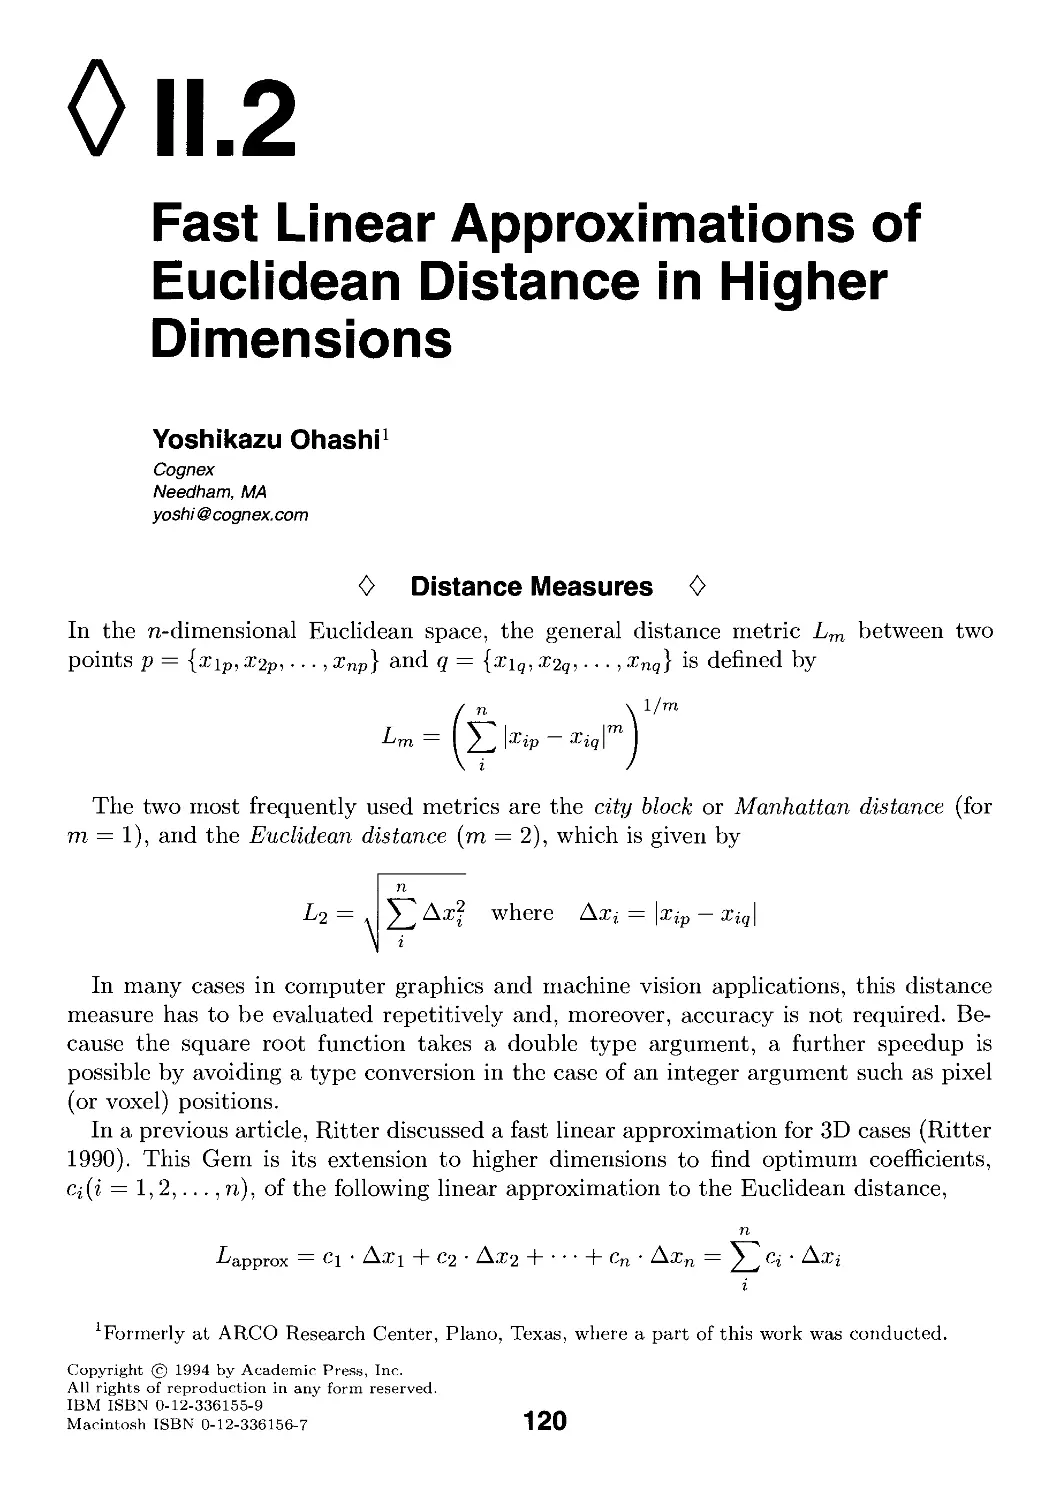 II.2. Fast Linear Approximations of Euclidean Distance in Higher Dimensions by Yoshikazu Ohashi